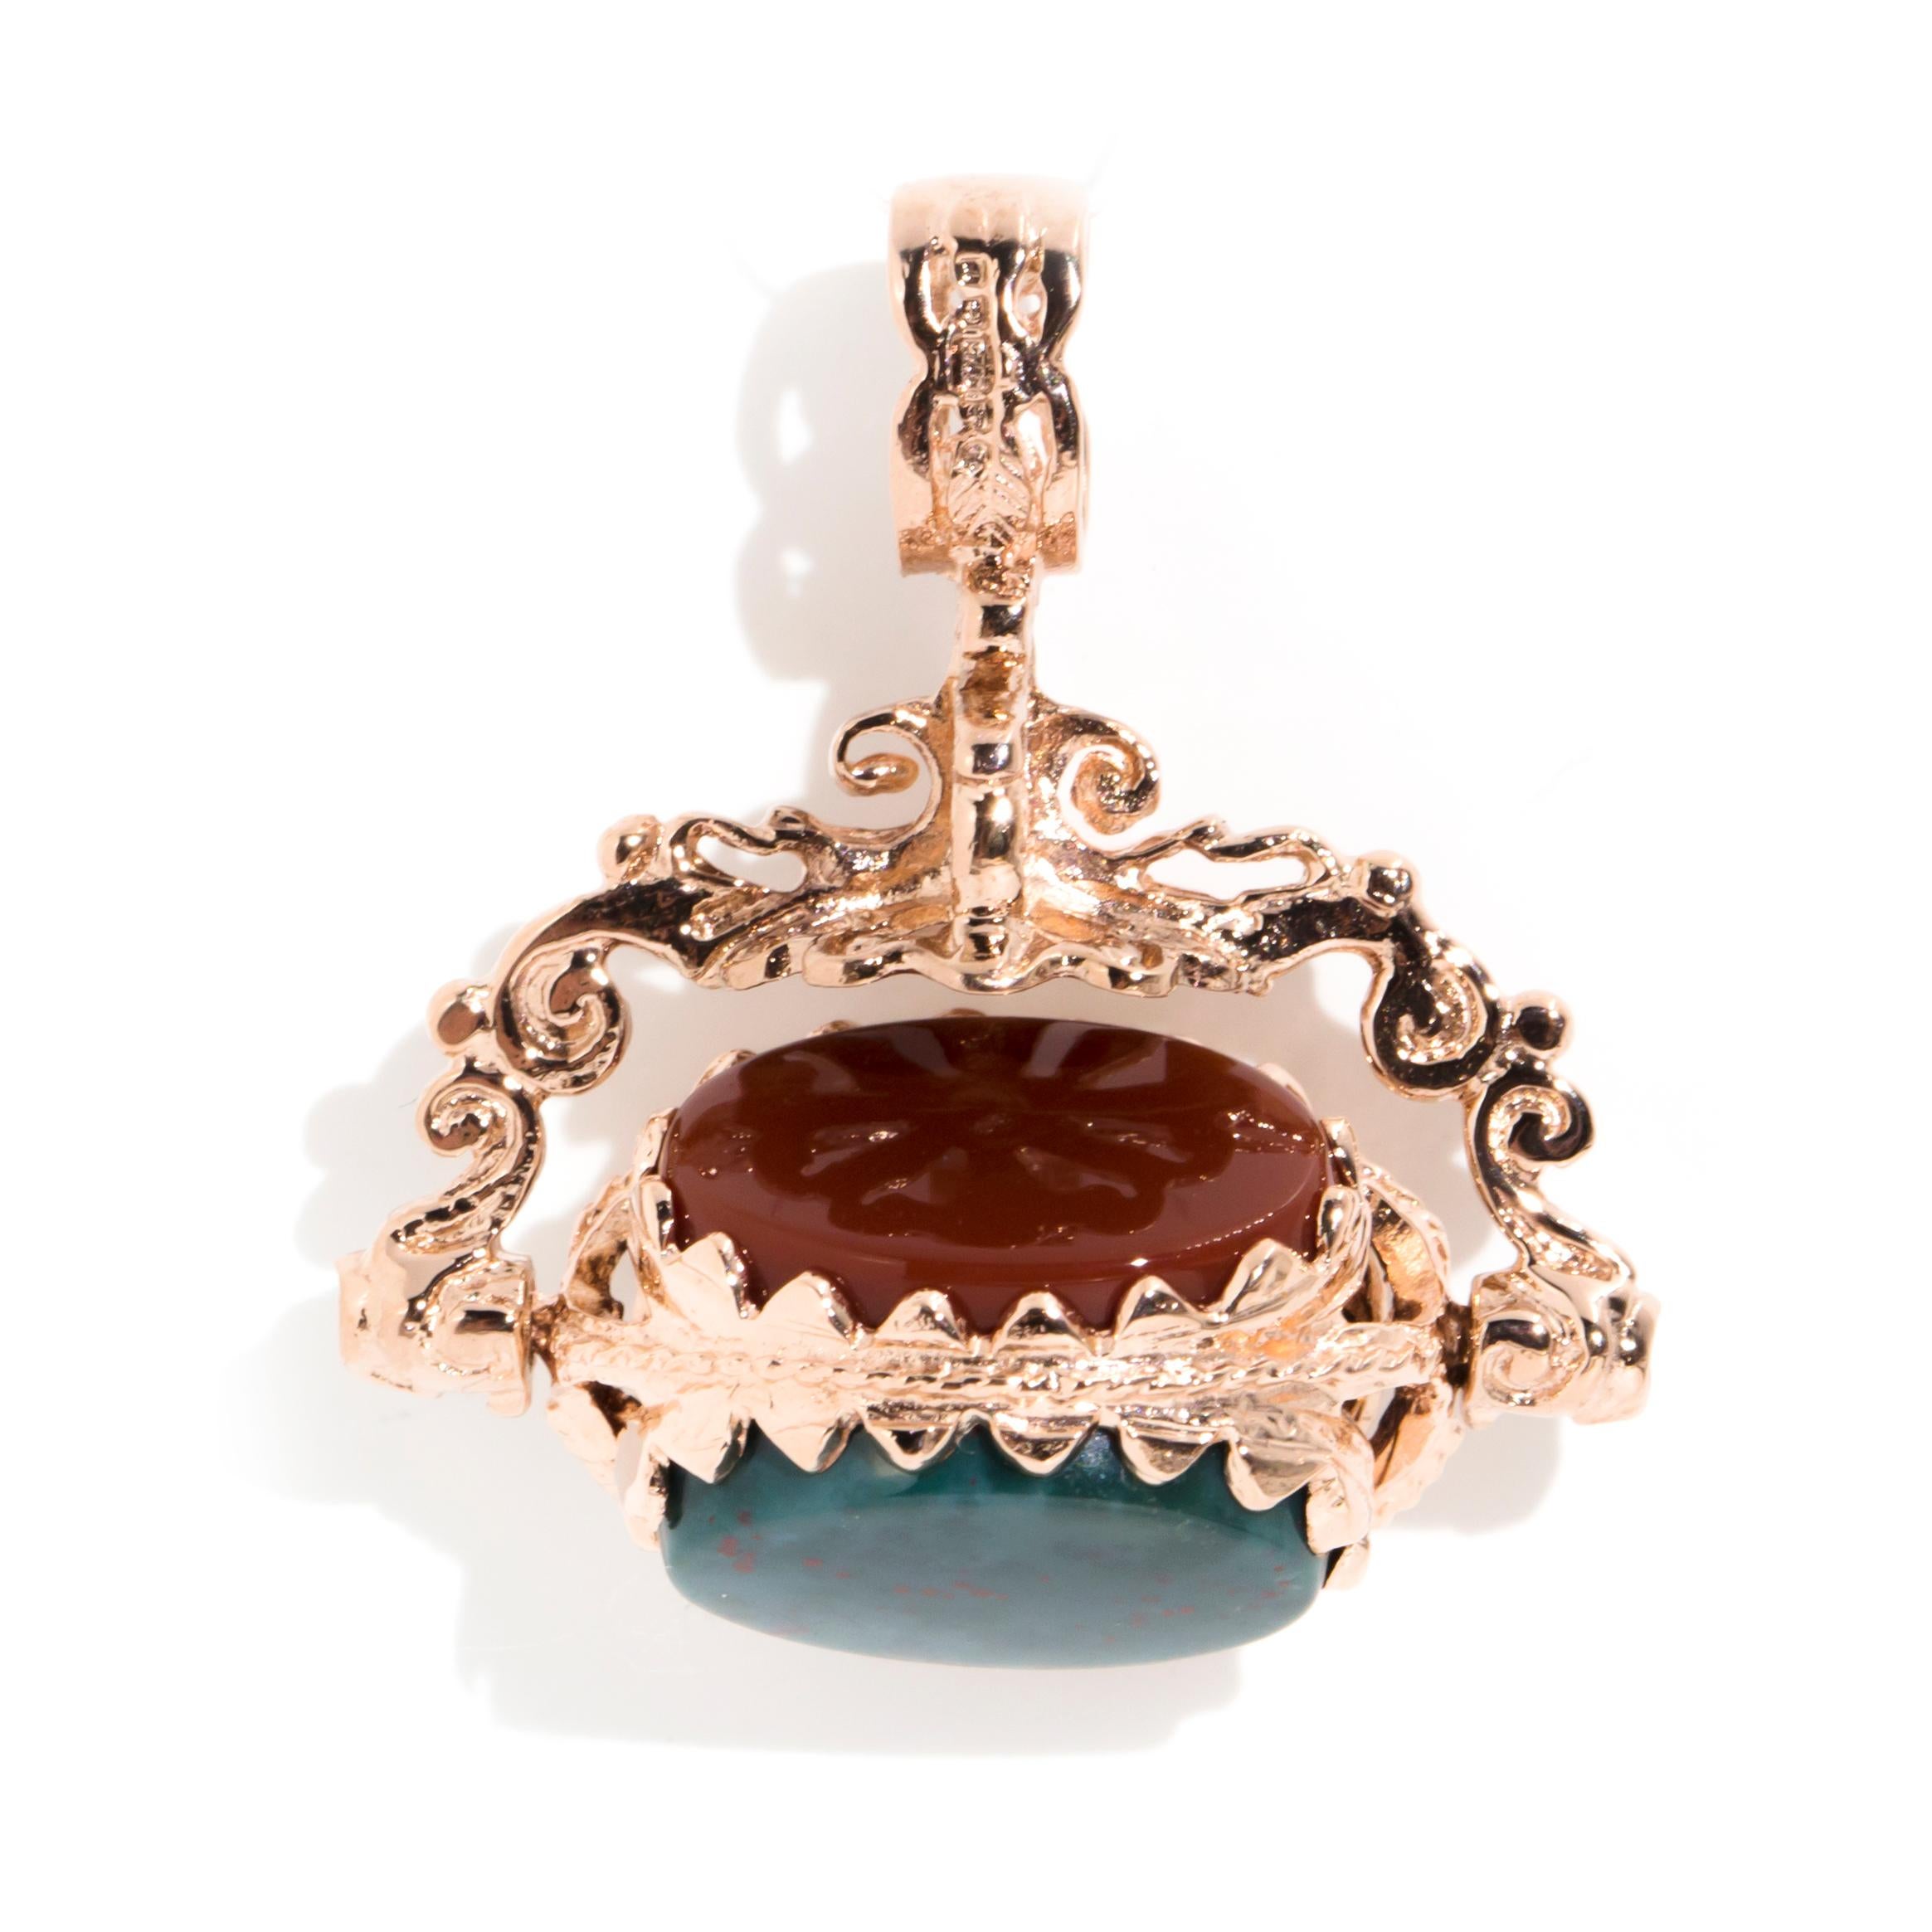 Lovingly crafted in 9 carat rose gold, this vintage spinner pendant features a handsome combination of bloodstone, carnelian, and onyx gemstones mounted in a unique spinning pendant. We have named this wondrous piece The Florian Pendant. She is a